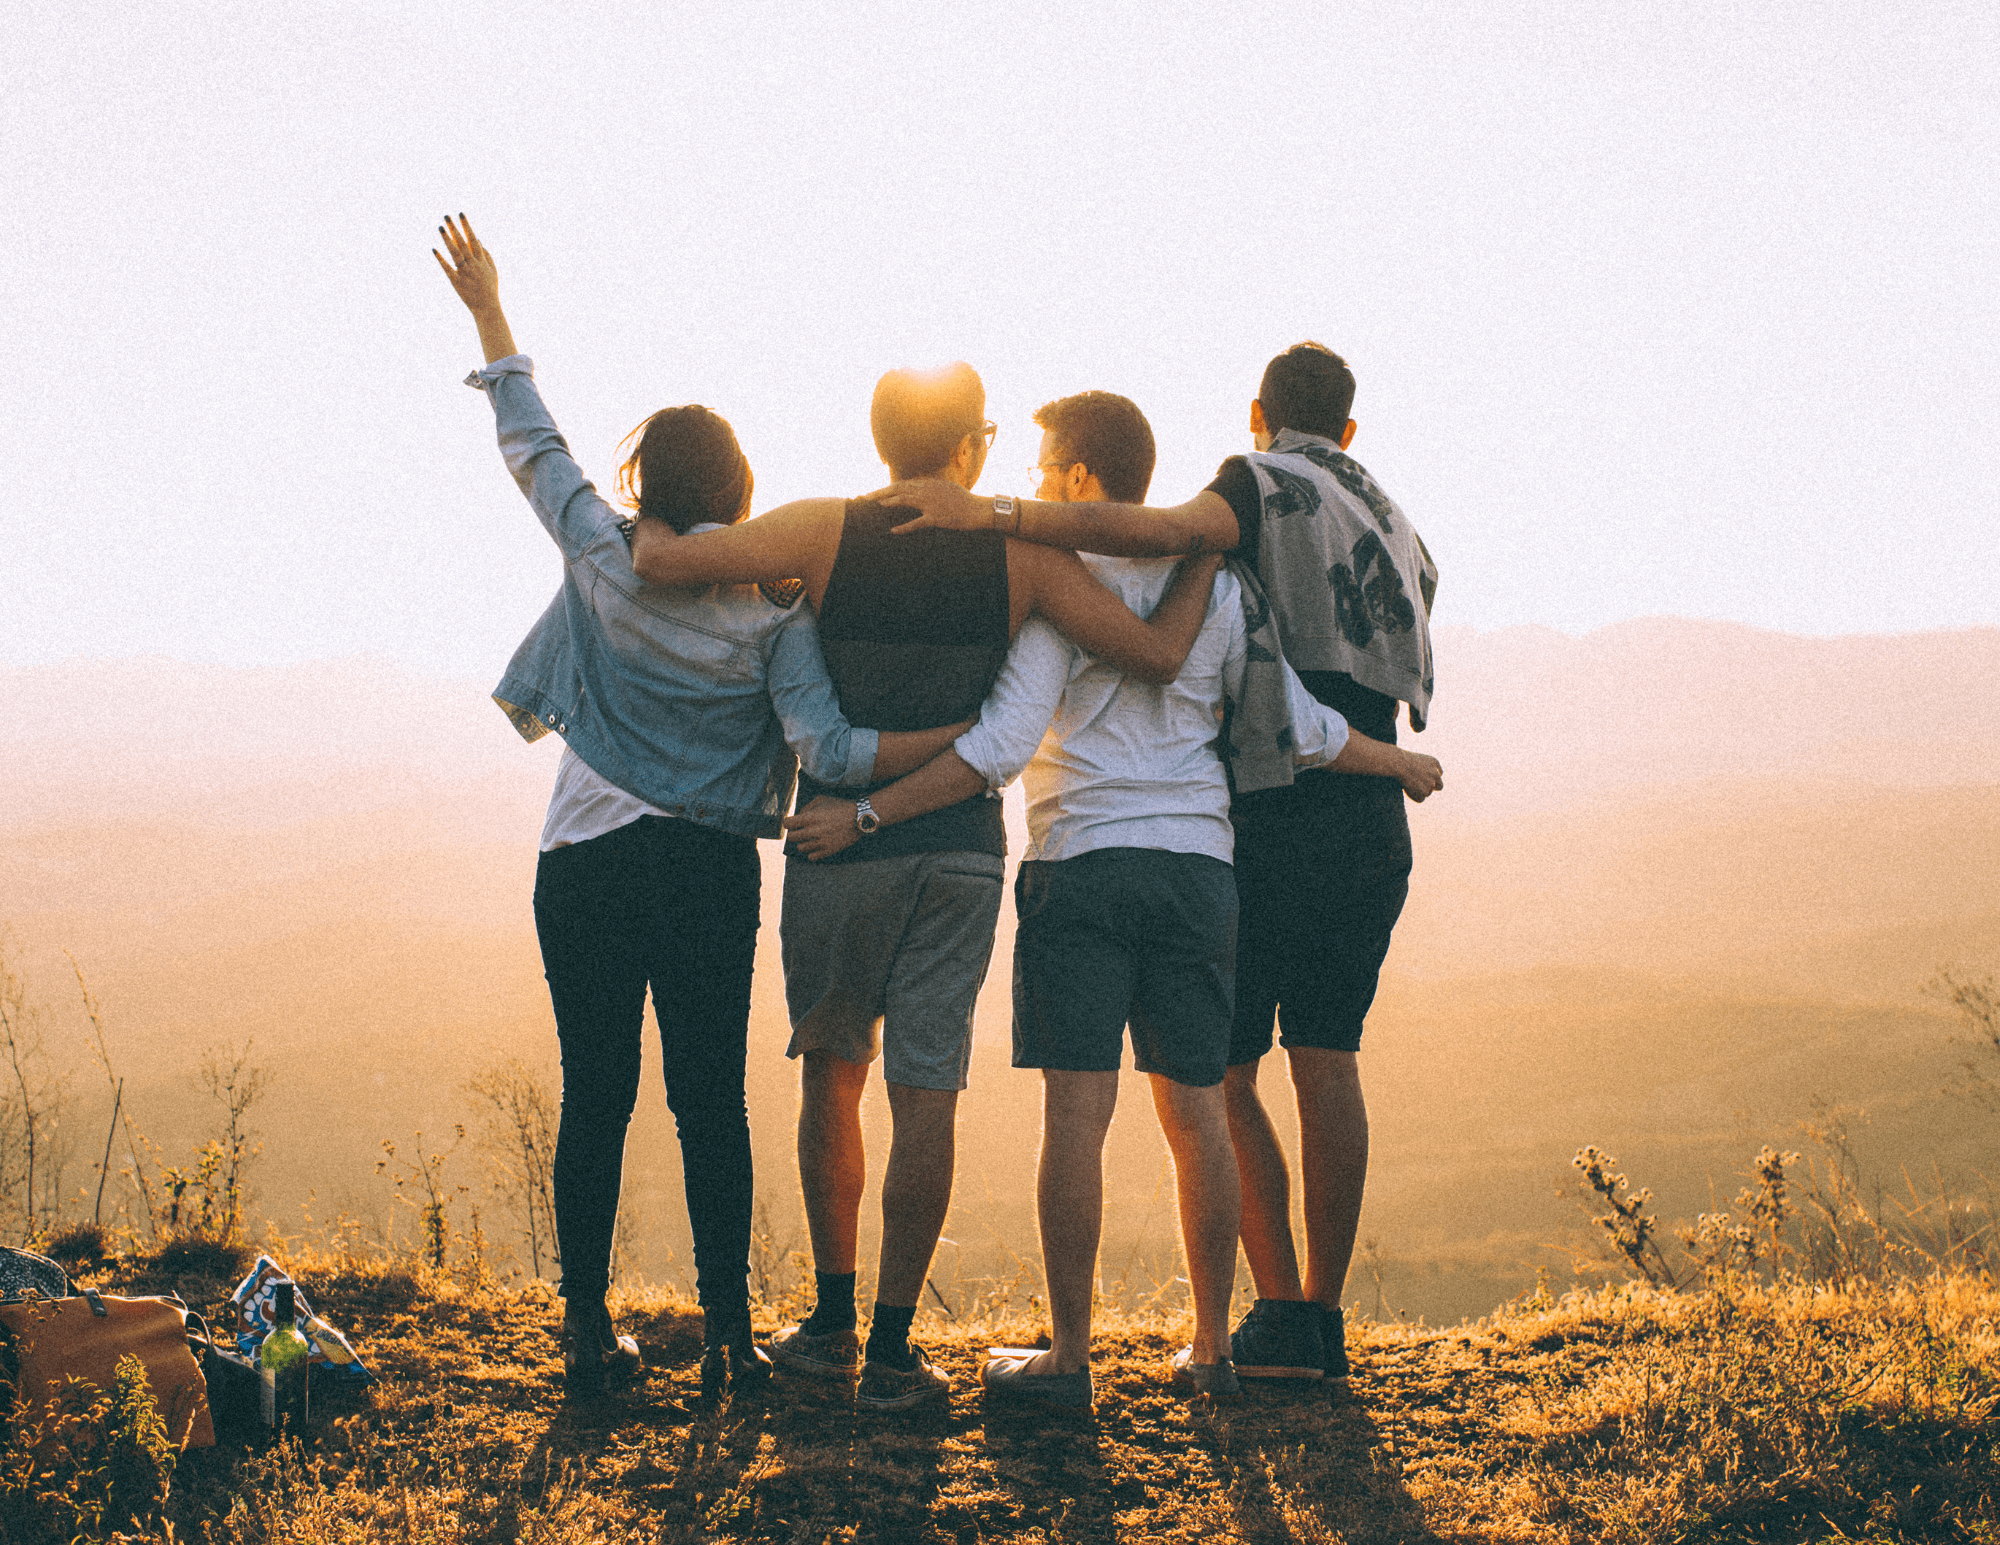 The back of four friends standing side-by-side, embracing one another, arms outstretched, enjoying the view of the horizon.